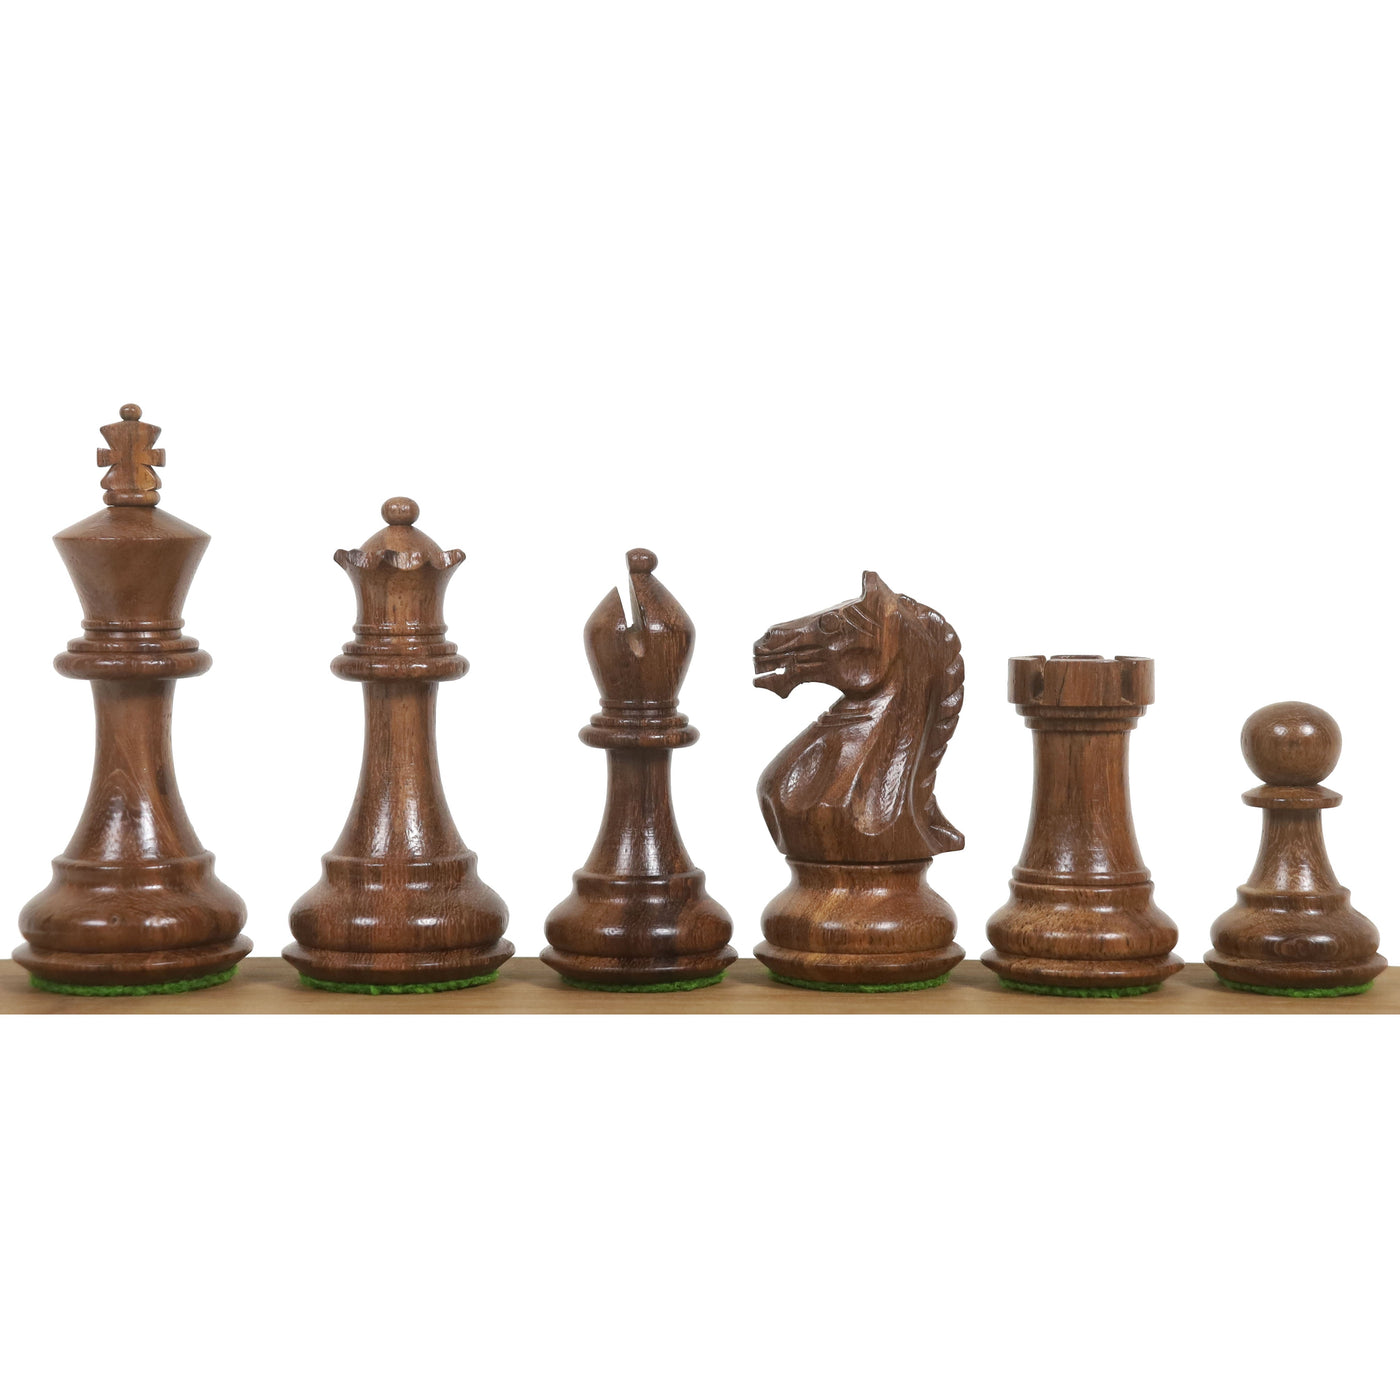 Combo of 3.75" Queens Gambit Staunton Chess Set - Pieces in Golden Rosewood with Board and Box